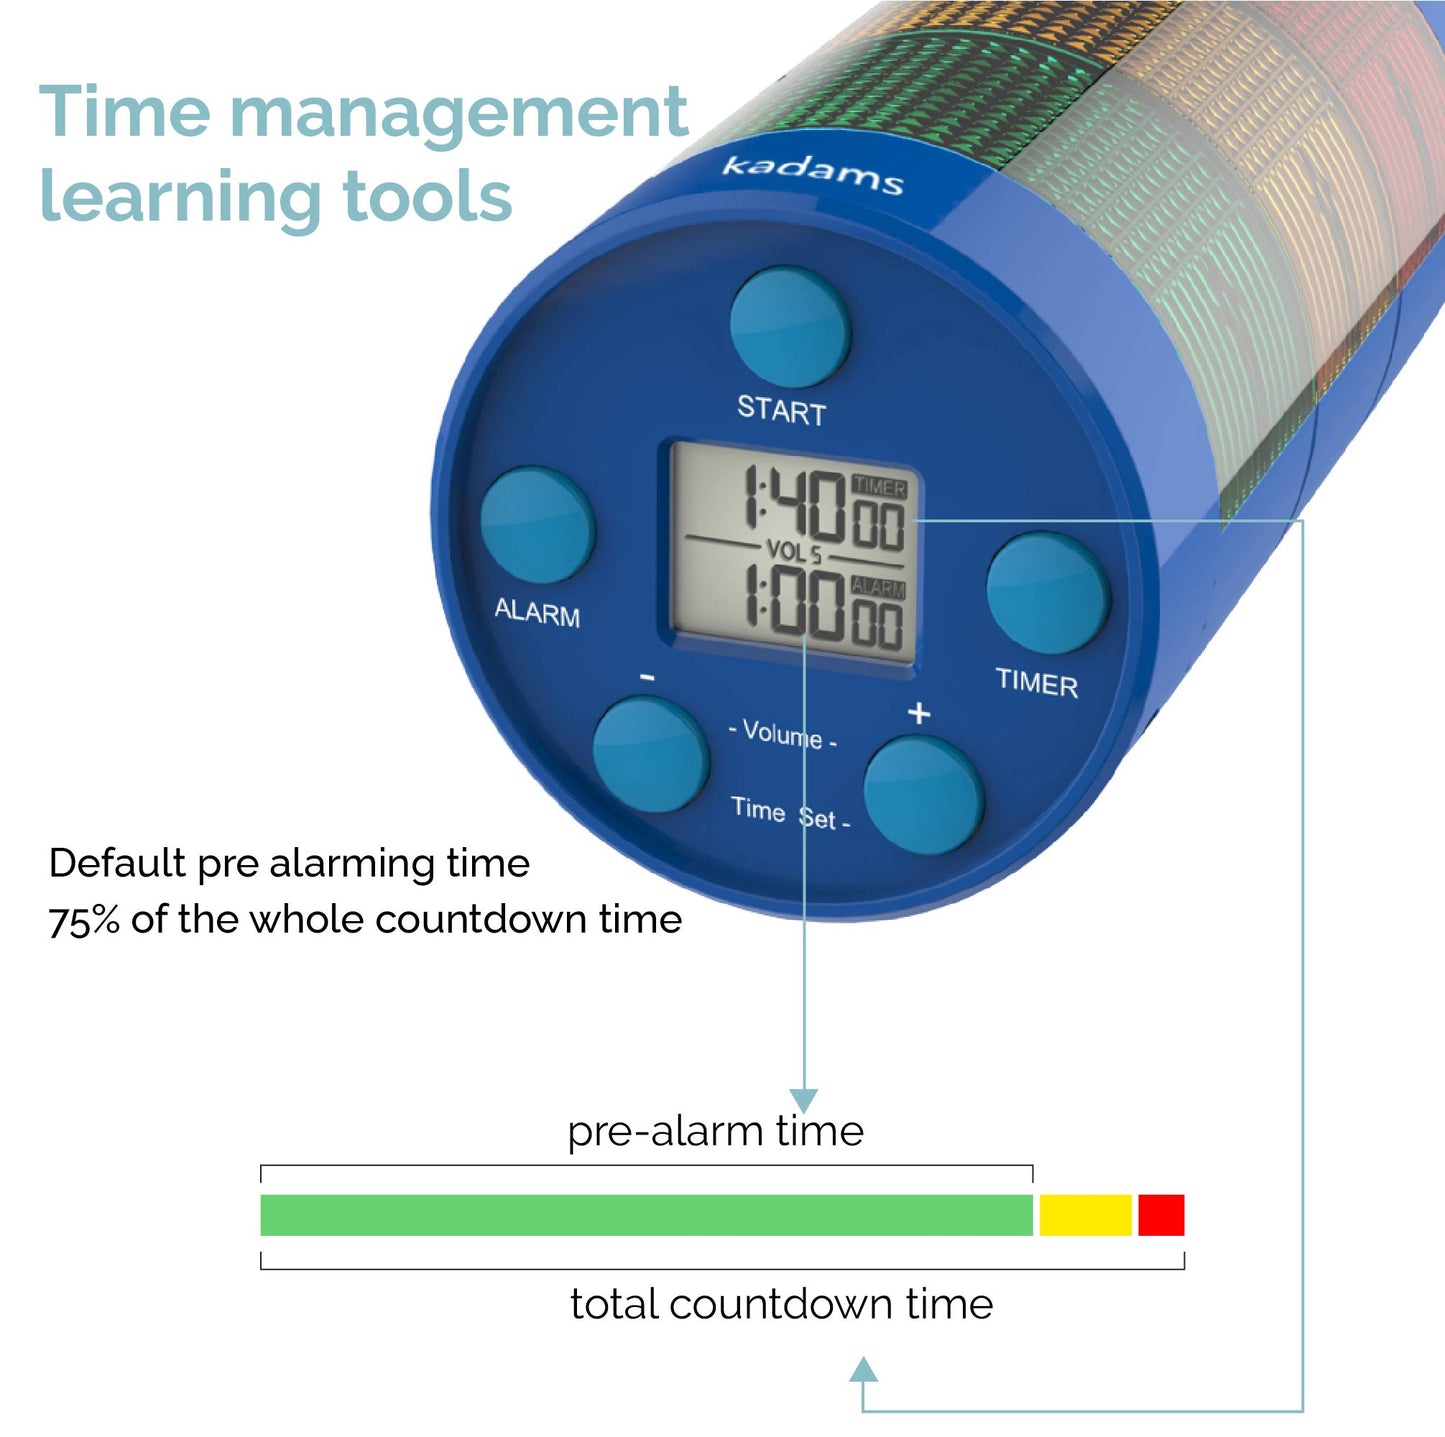 KADAMS Visual Timer for Kids with Audio Alarm Pause Function, 24hr Countdown